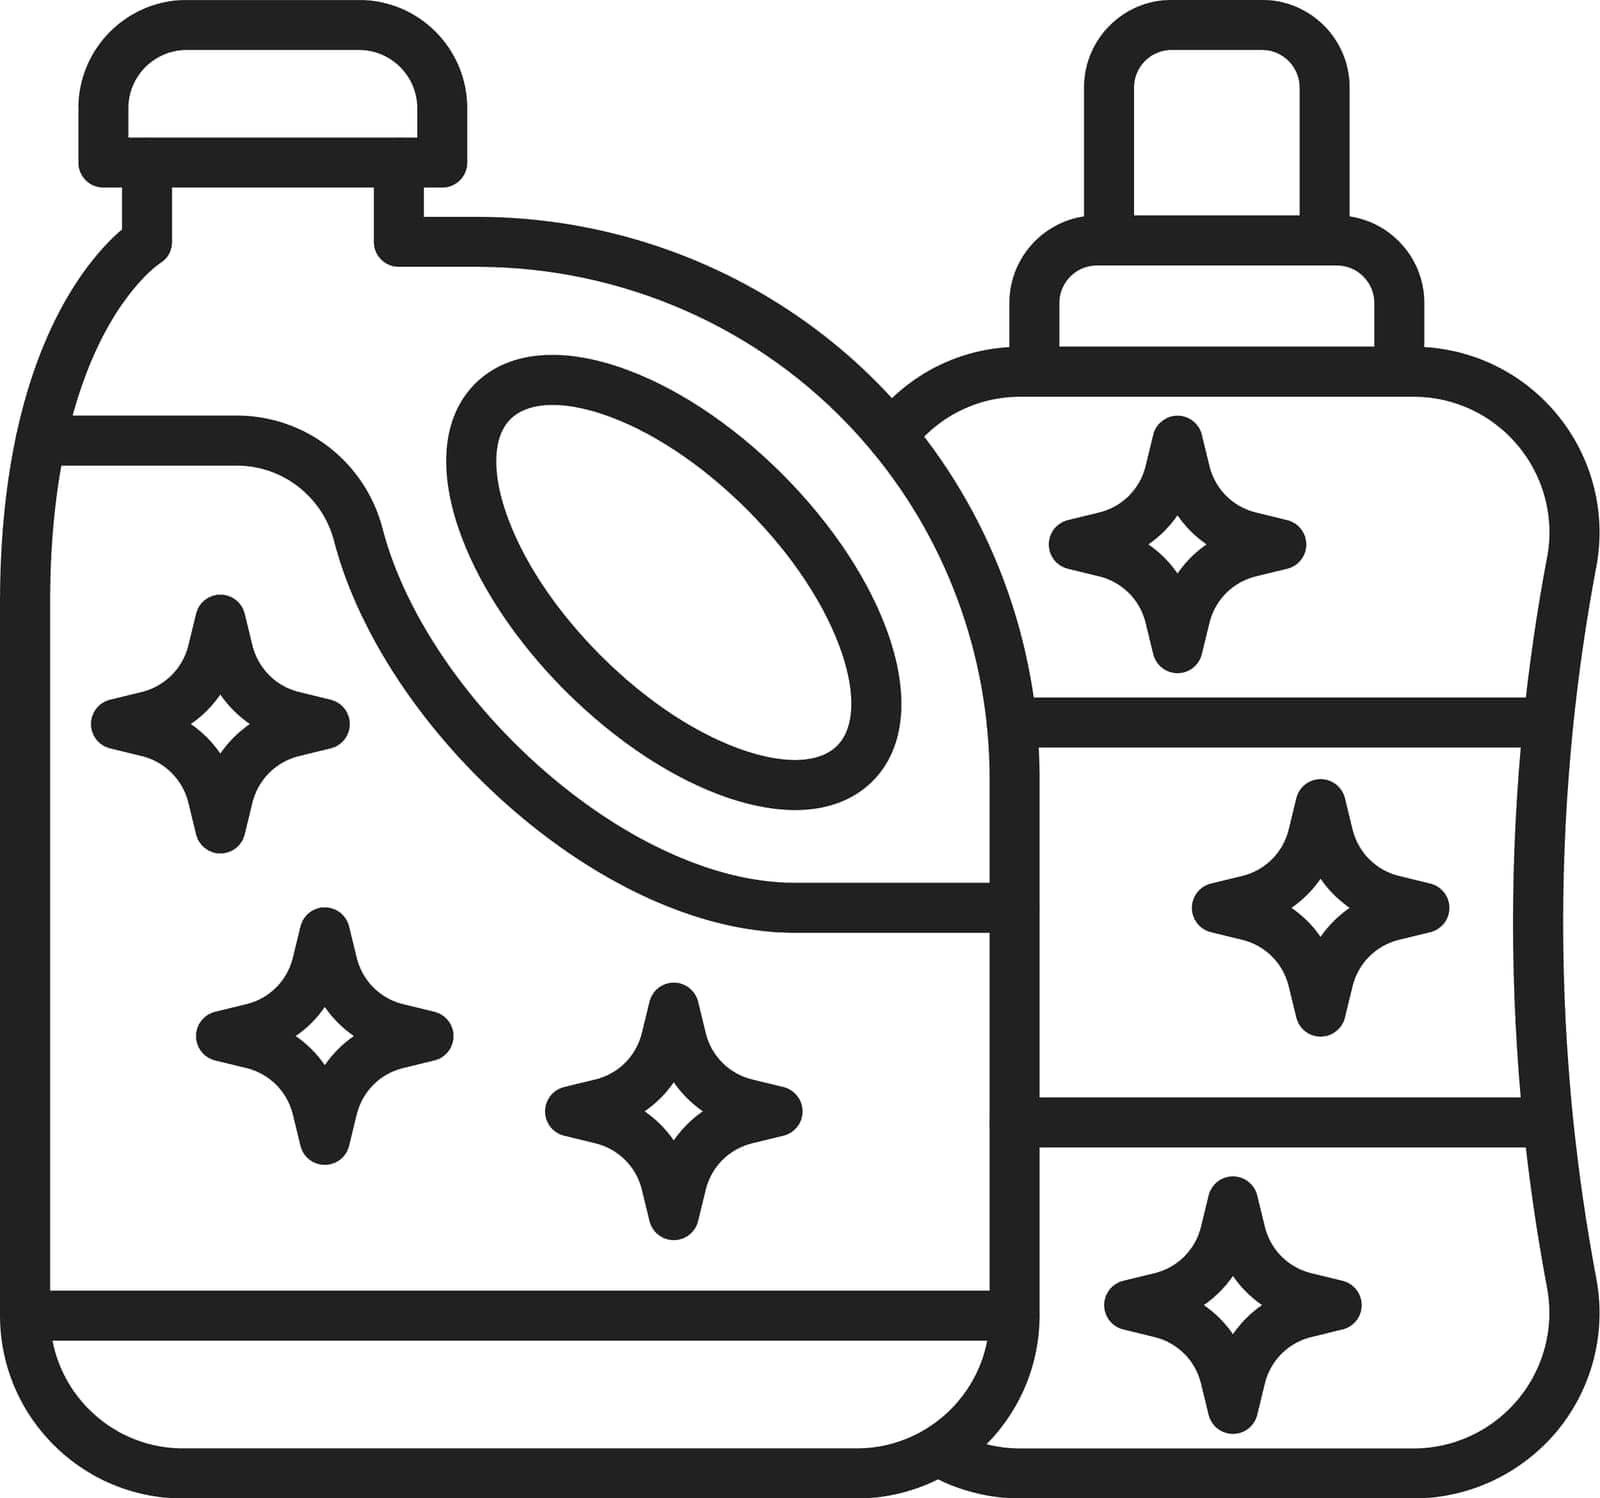 Detergent icon vector image. Suitable for mobile application web application and print media.